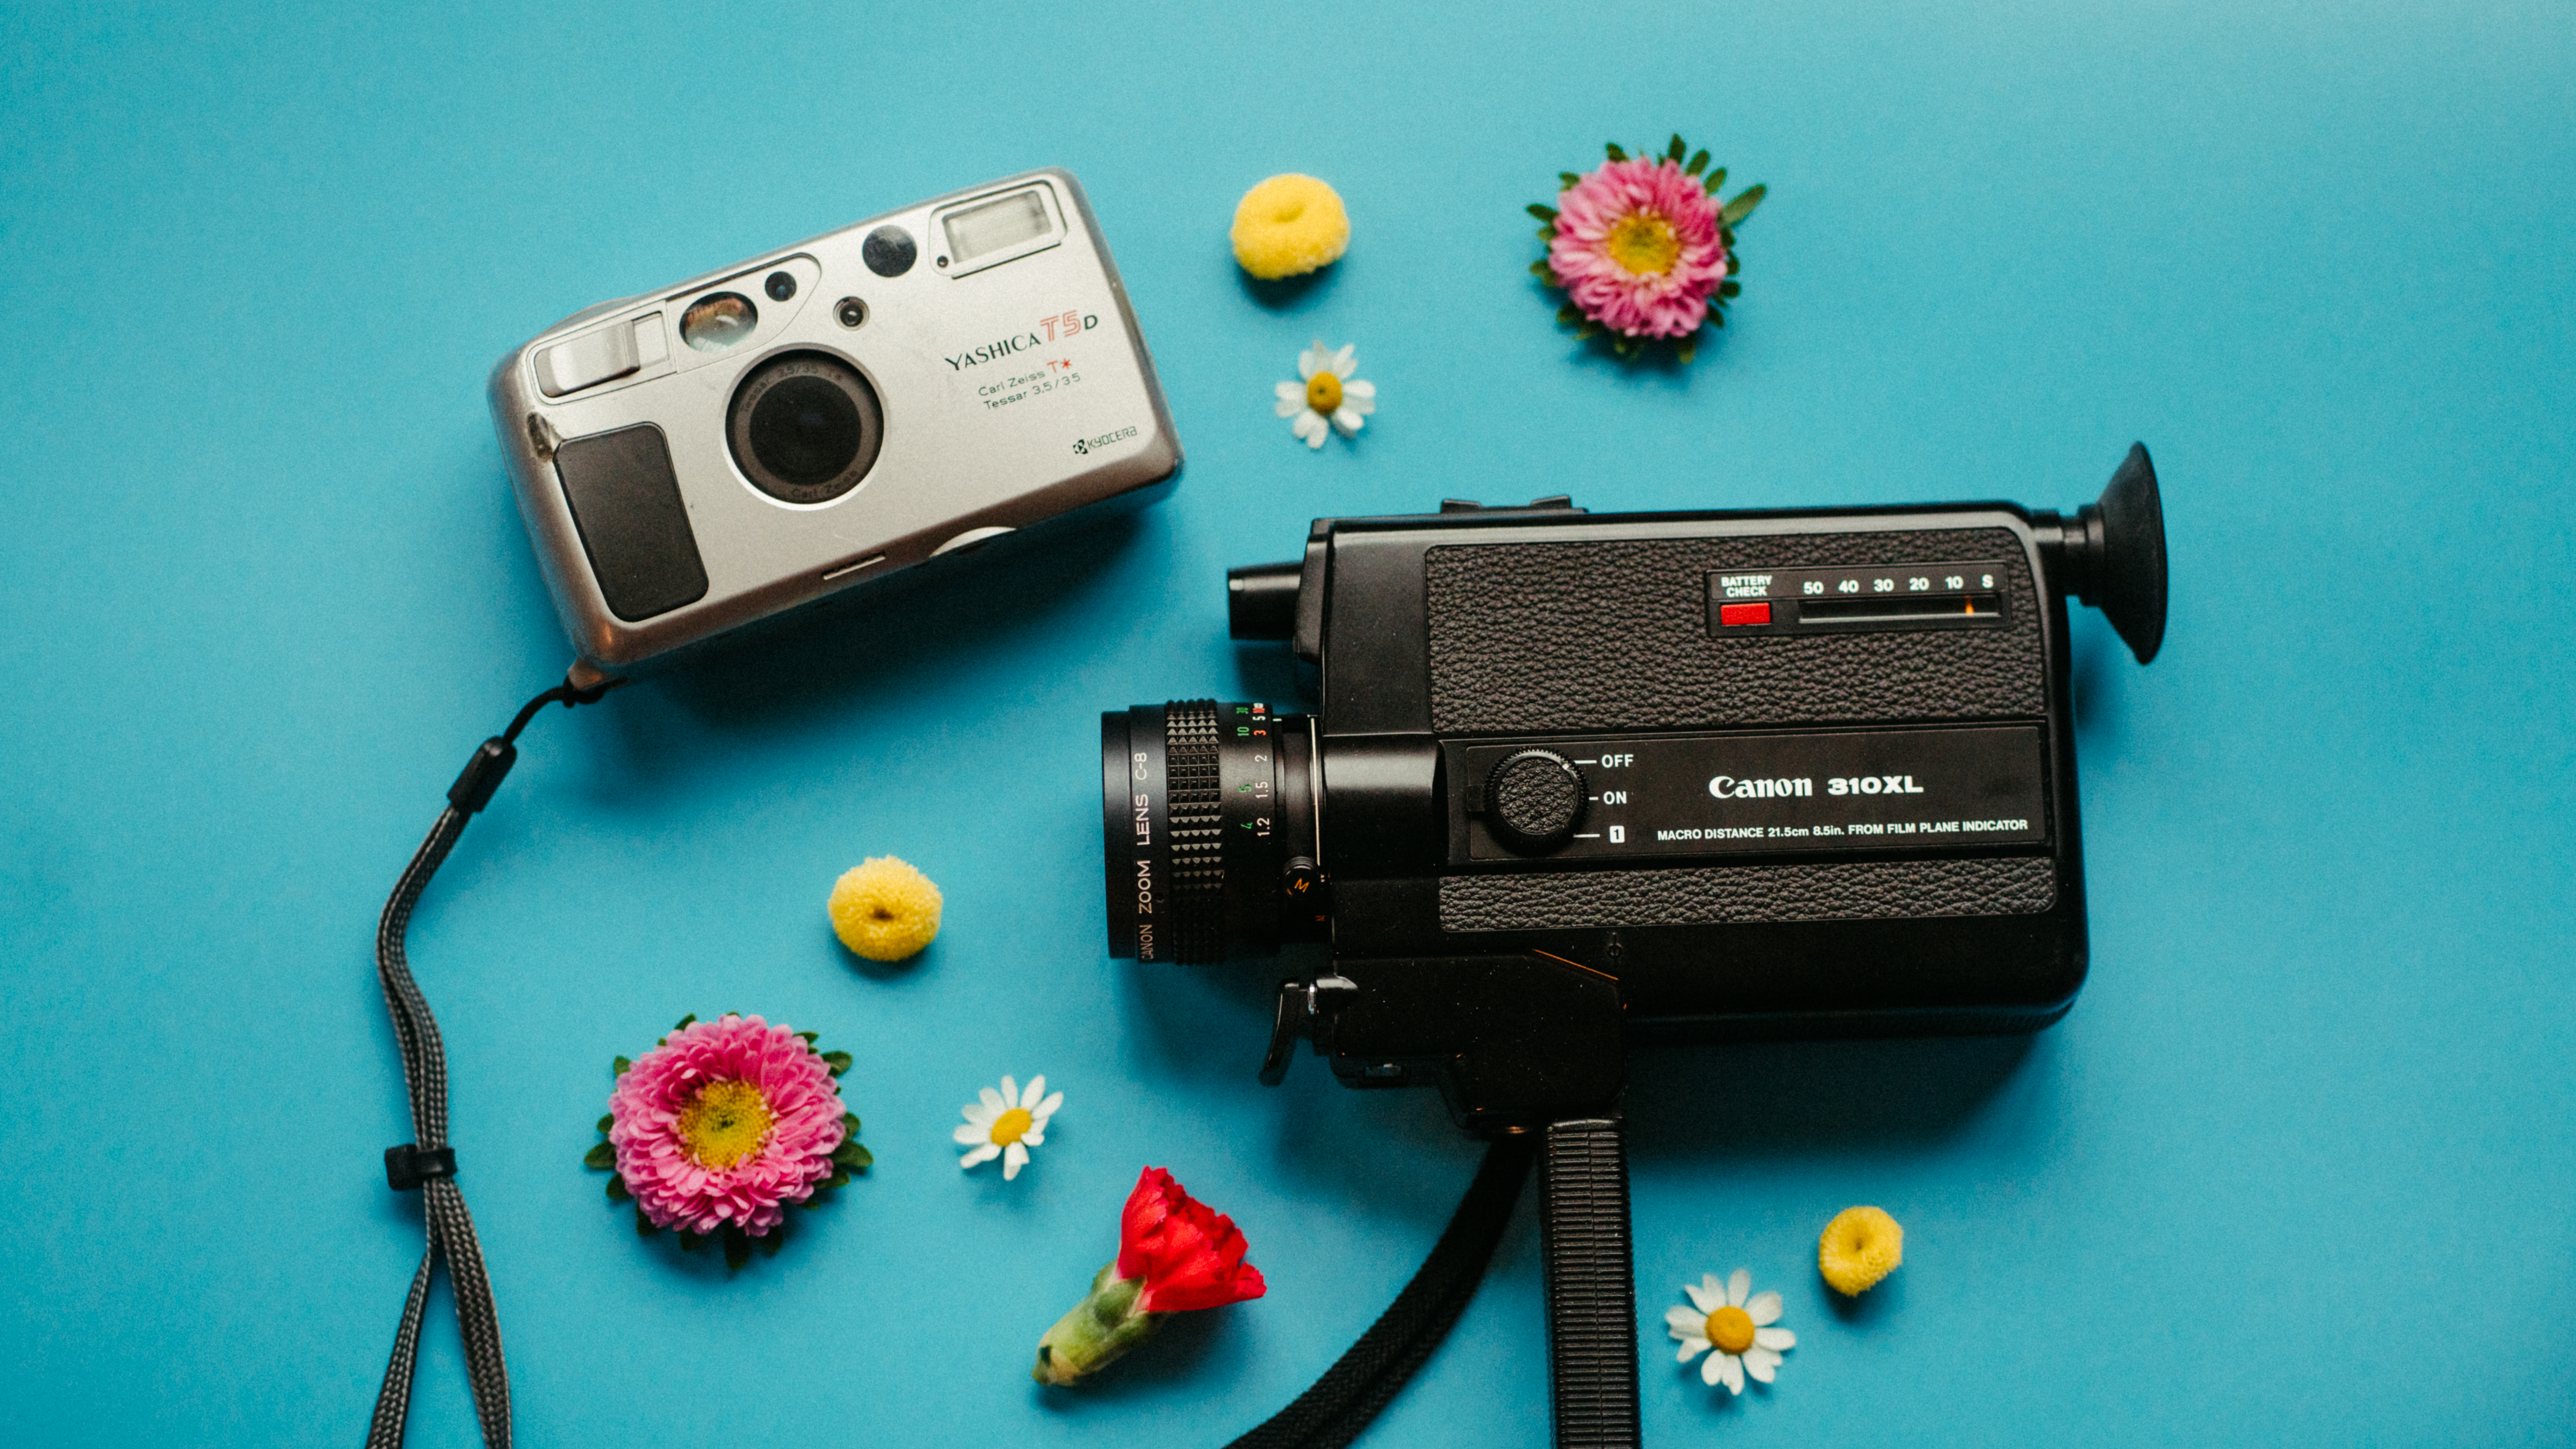 A vintage camera and super 8 camcorder sit on a blue background surrounded by flowers